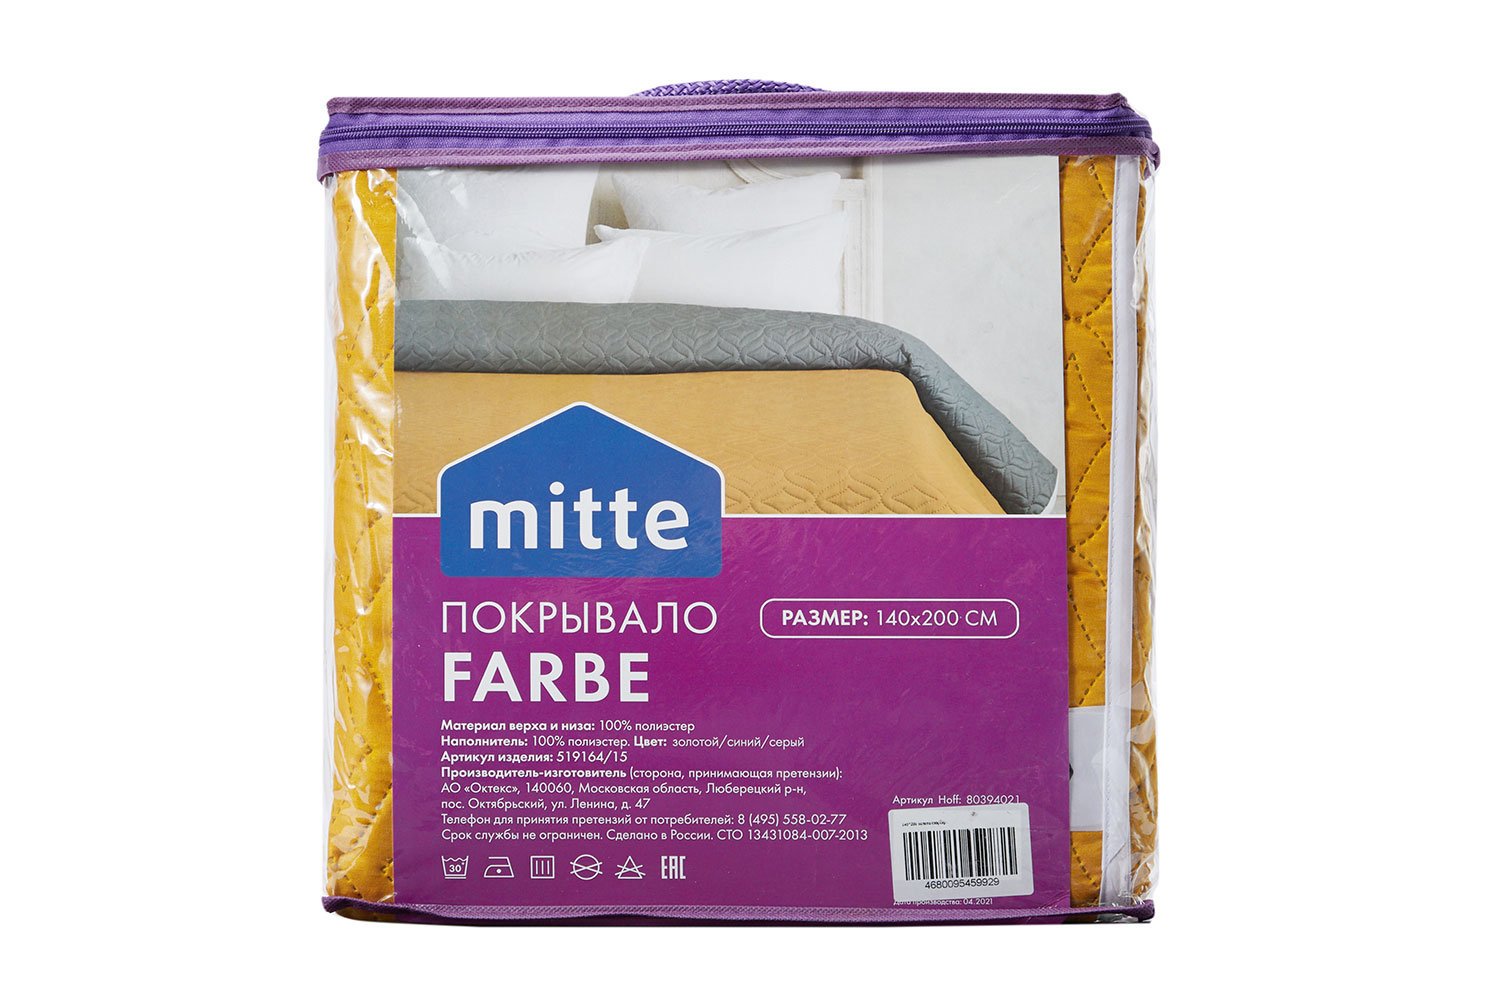 фото Покрывало farbe mitte